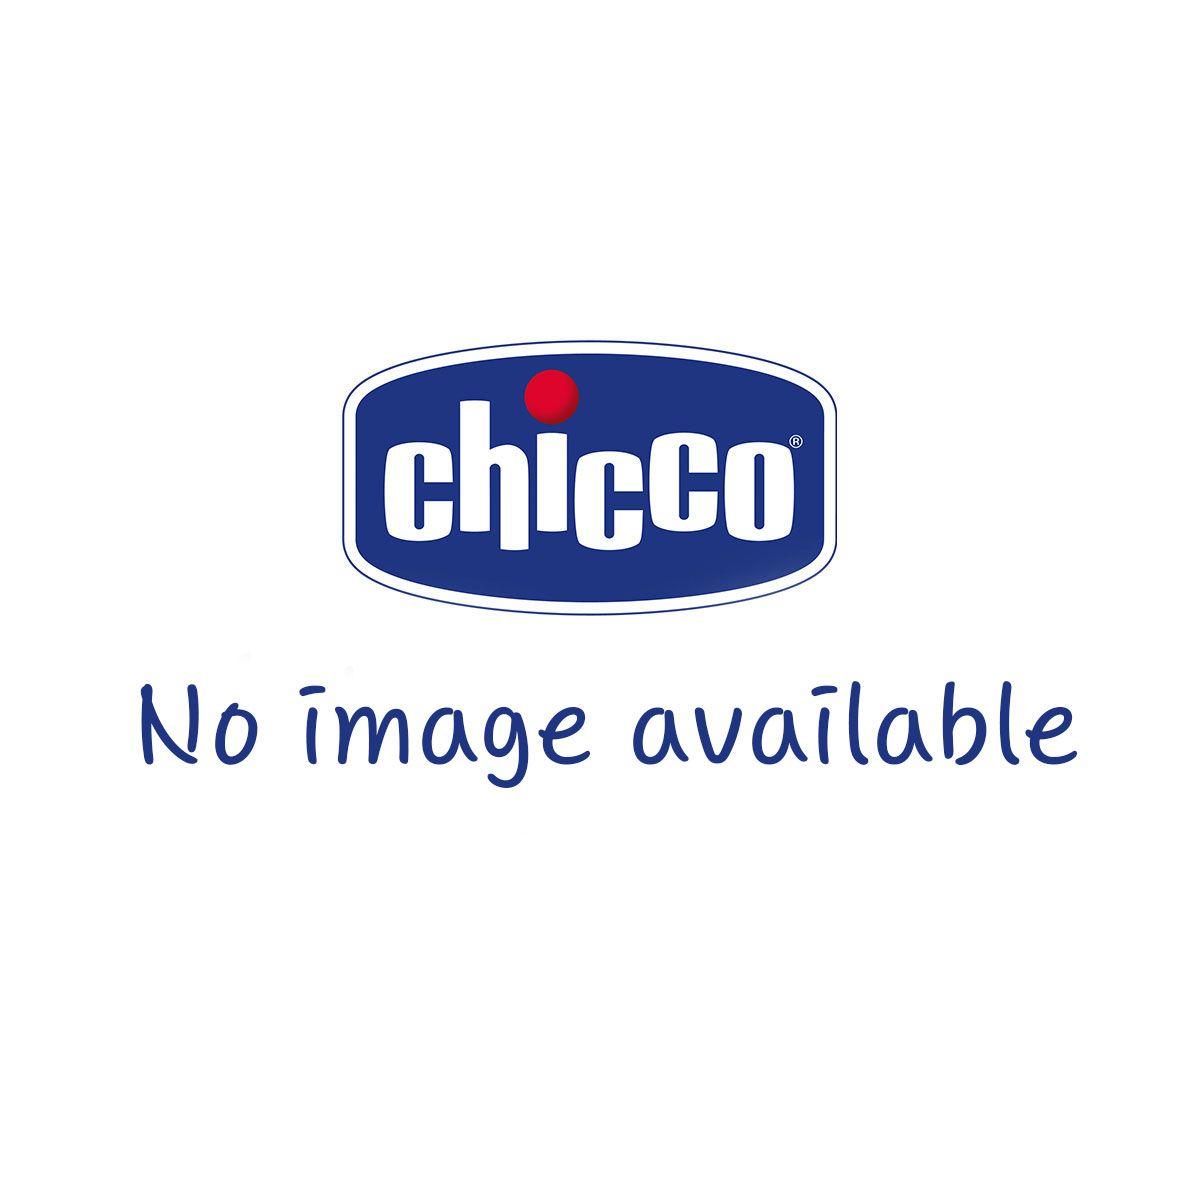 Chicco Logo - Toys to stimulate movement | Chicco.uk